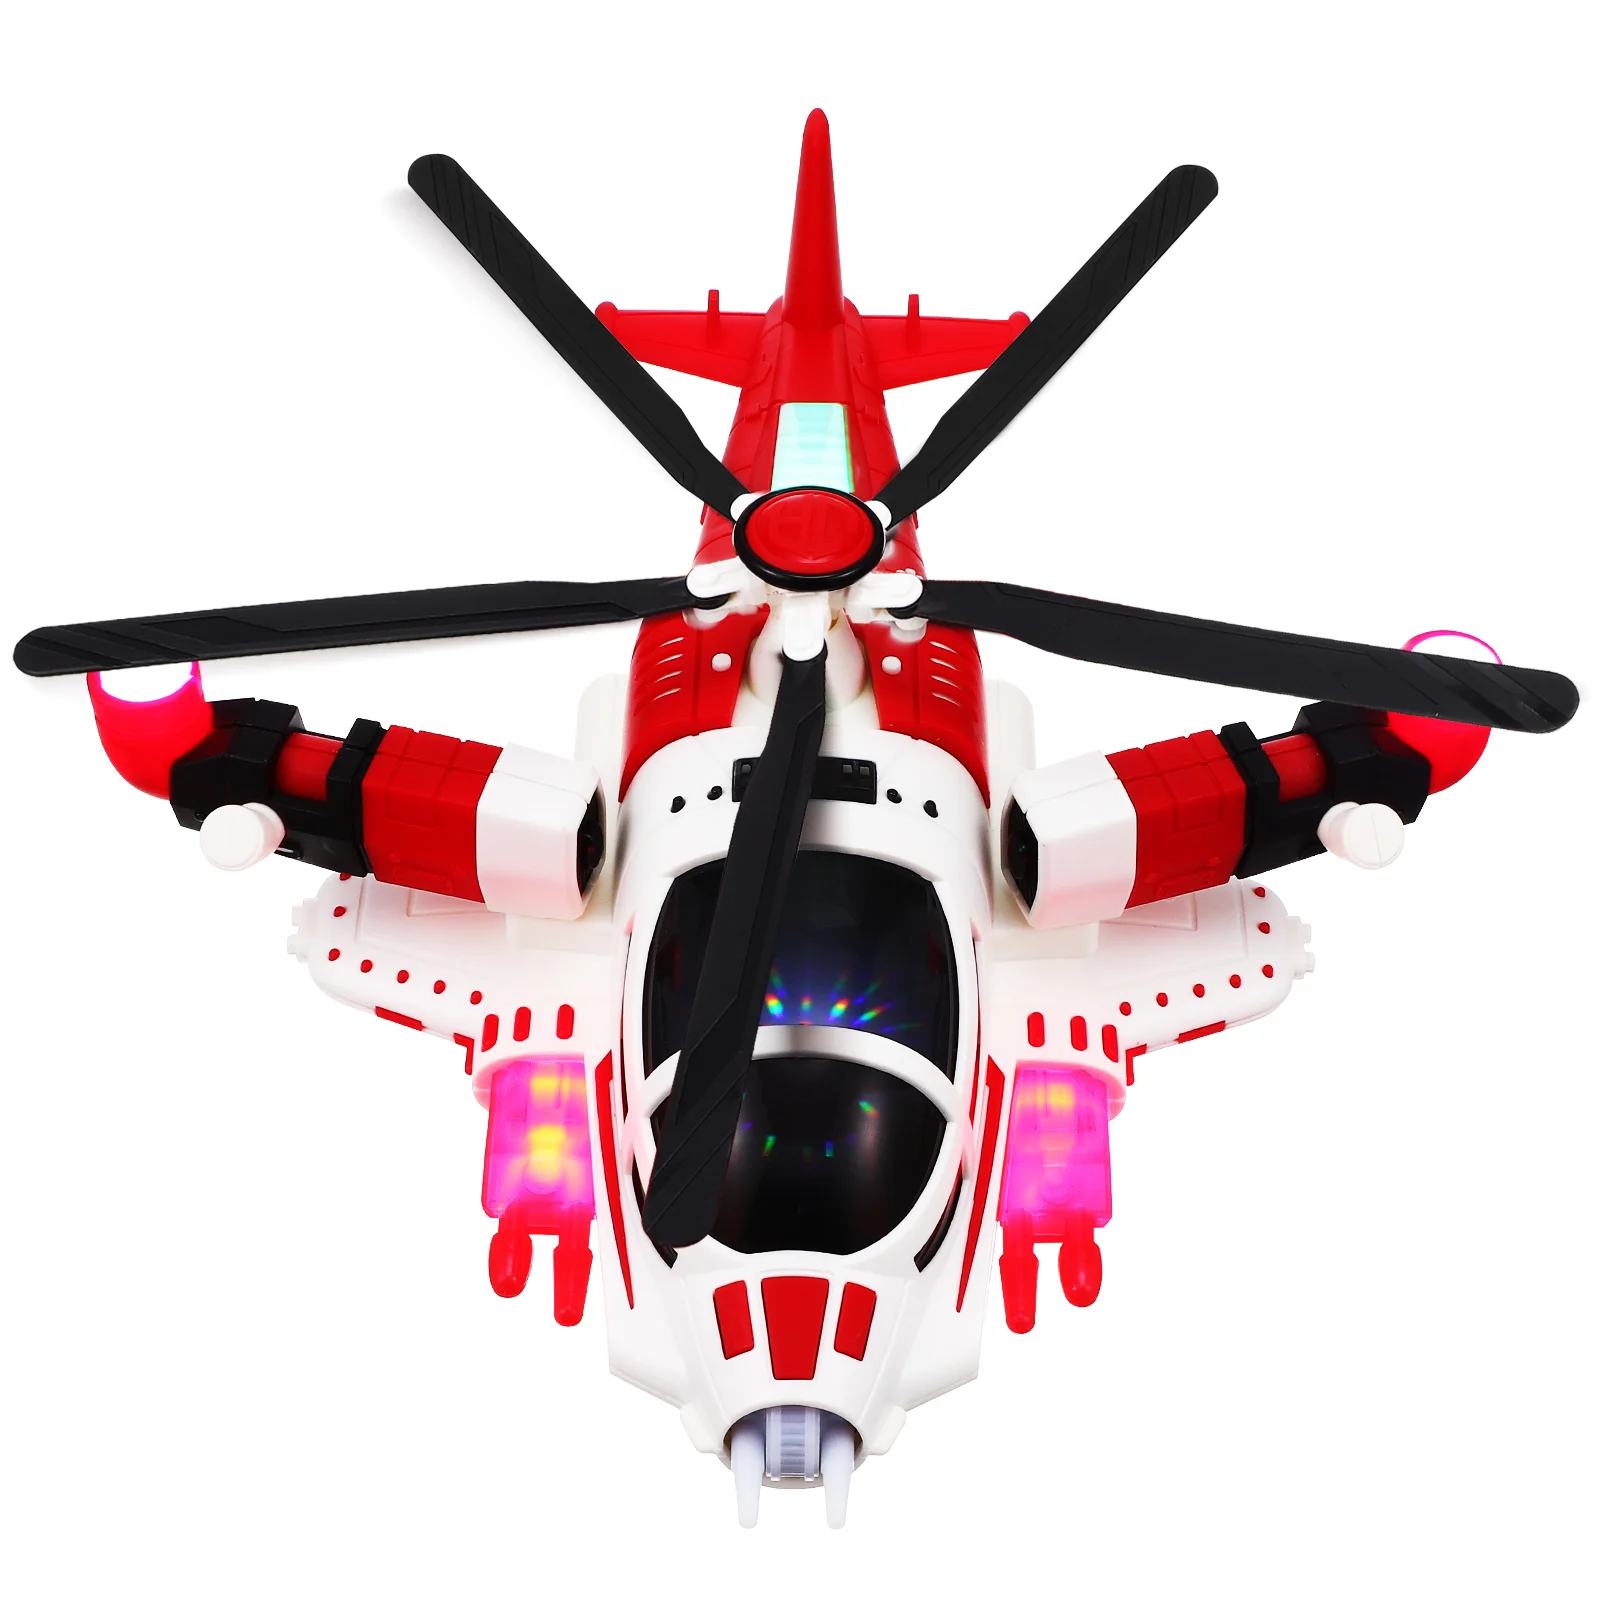 

Toy Plane Airplane Toys For 3 Year Old Helicopter Airplanes Boys Toddlers 1-3 Kids Aeroplane